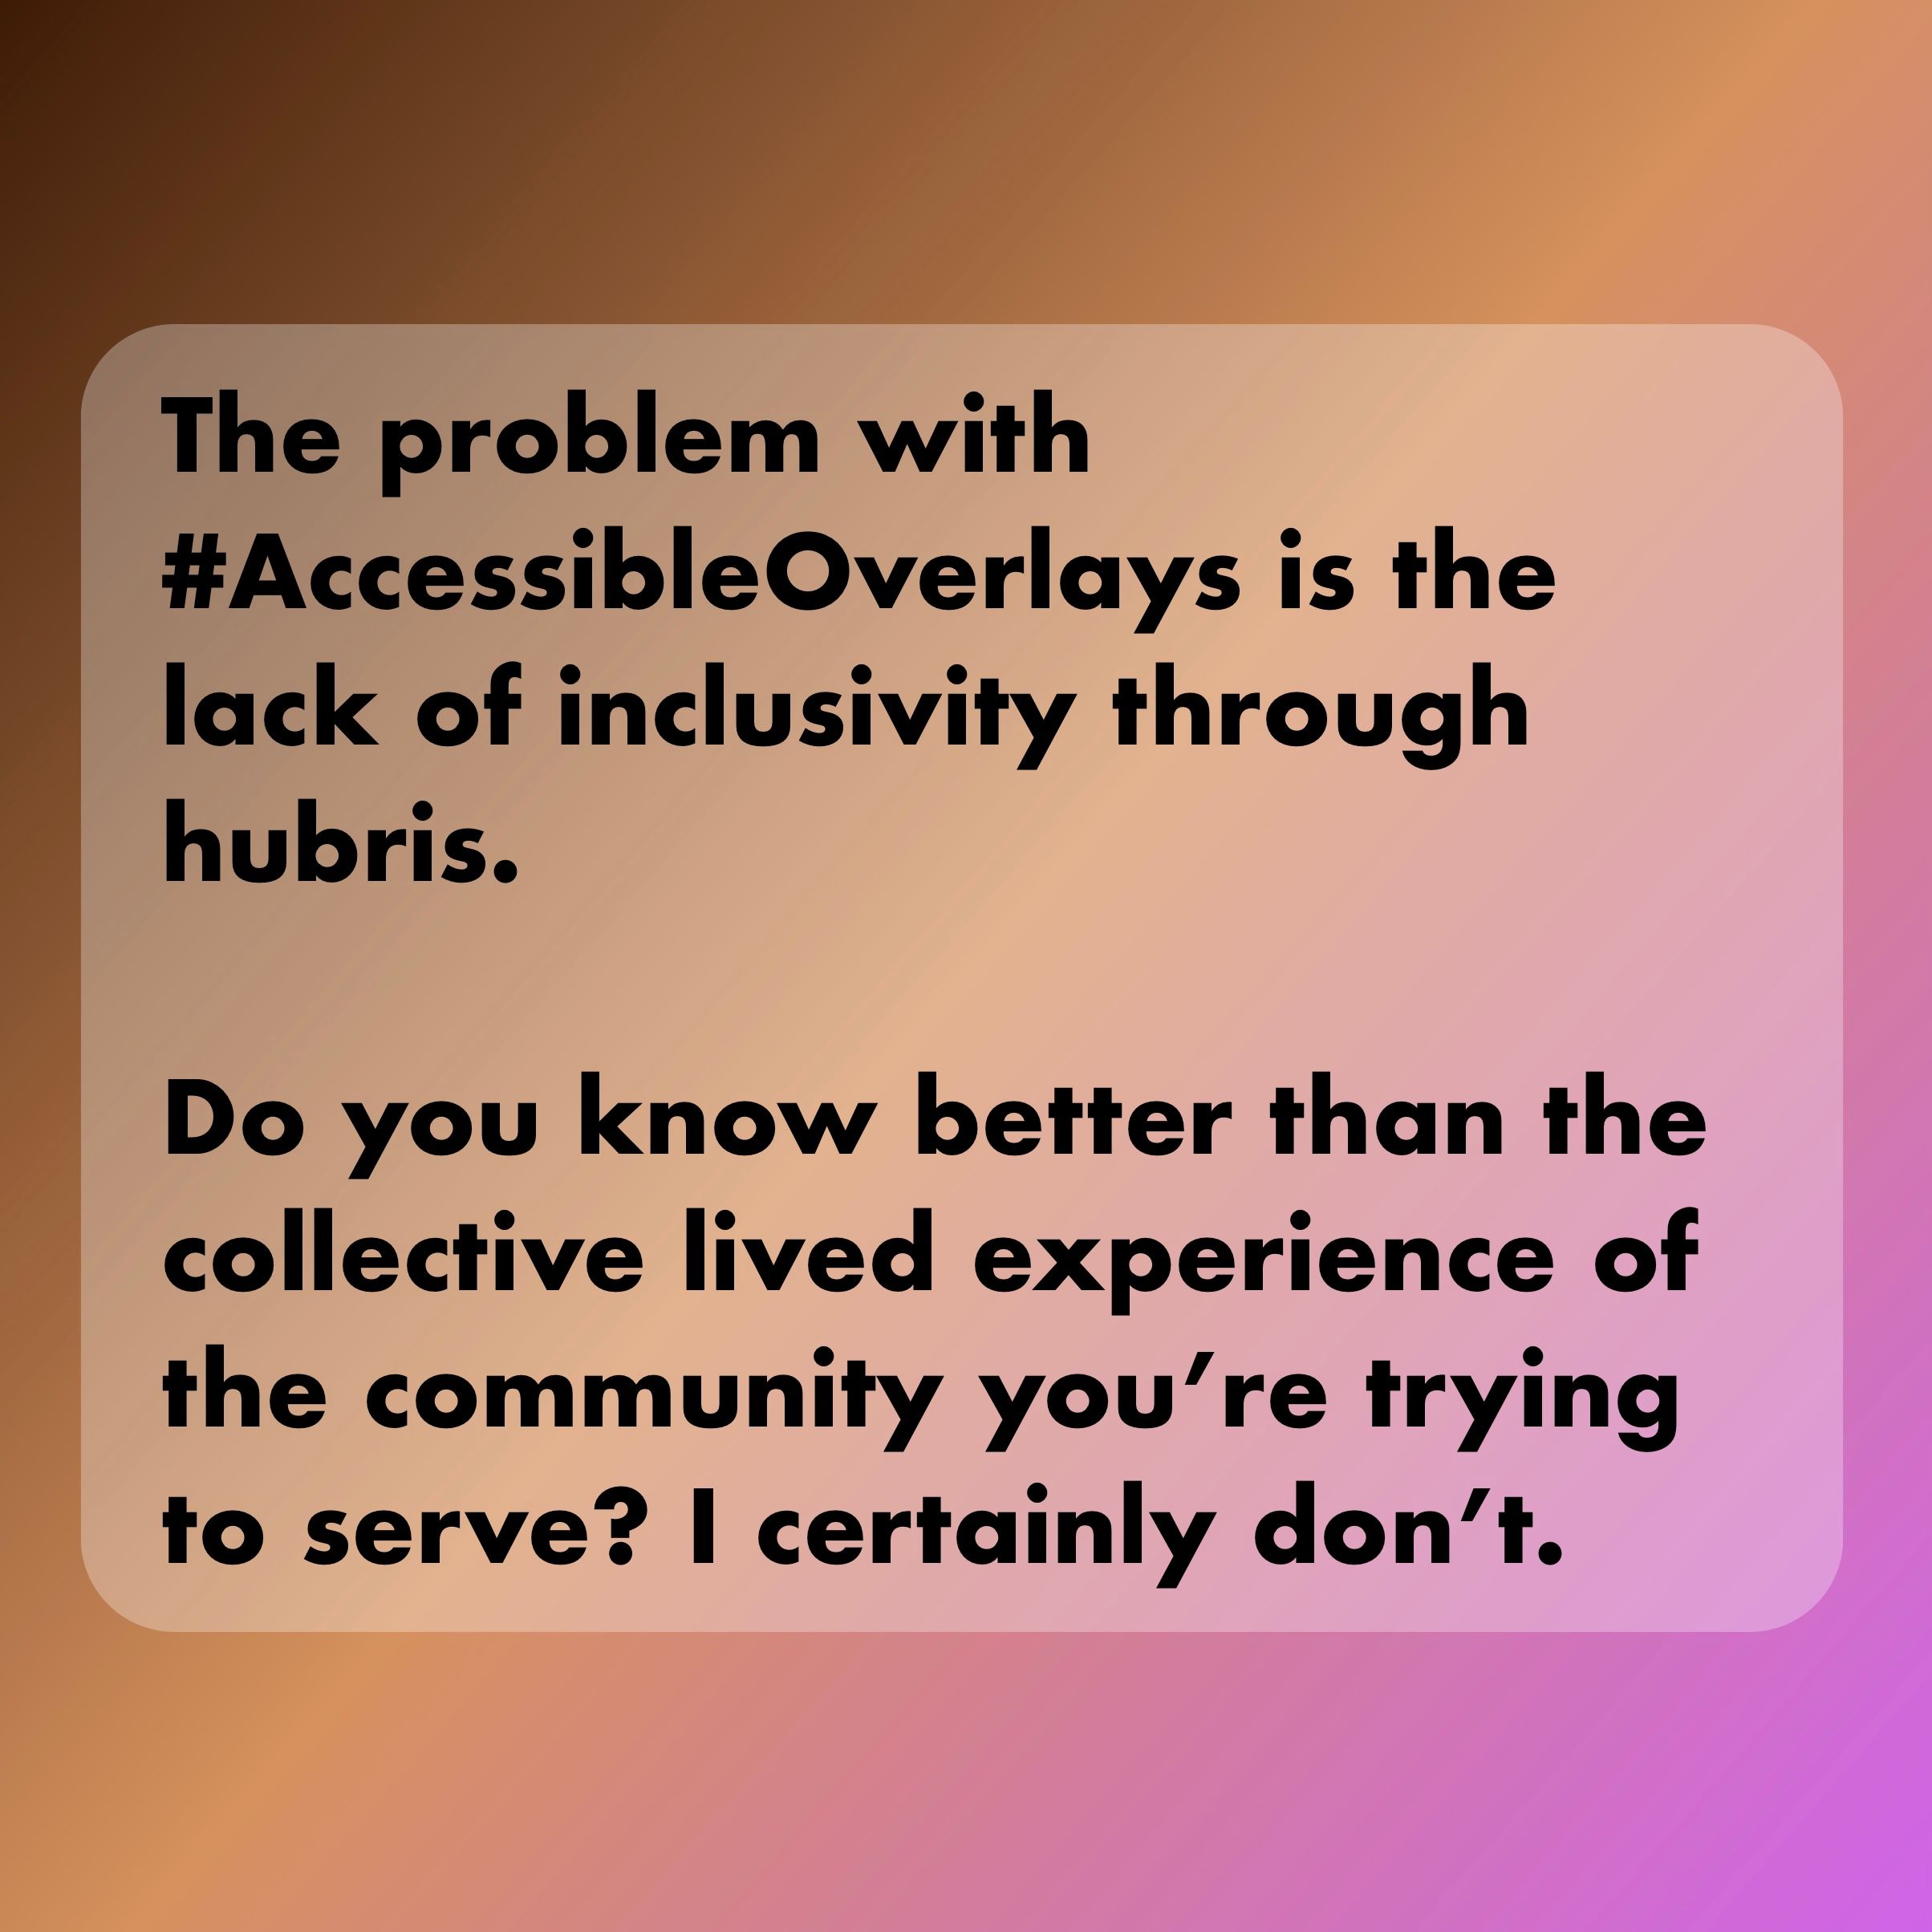 The problem with AccessibleOverlays is the lack of inclusivity through hubris. Do you know better than the collective lived experience of the community you’re trying to serve? I certainly don’t.